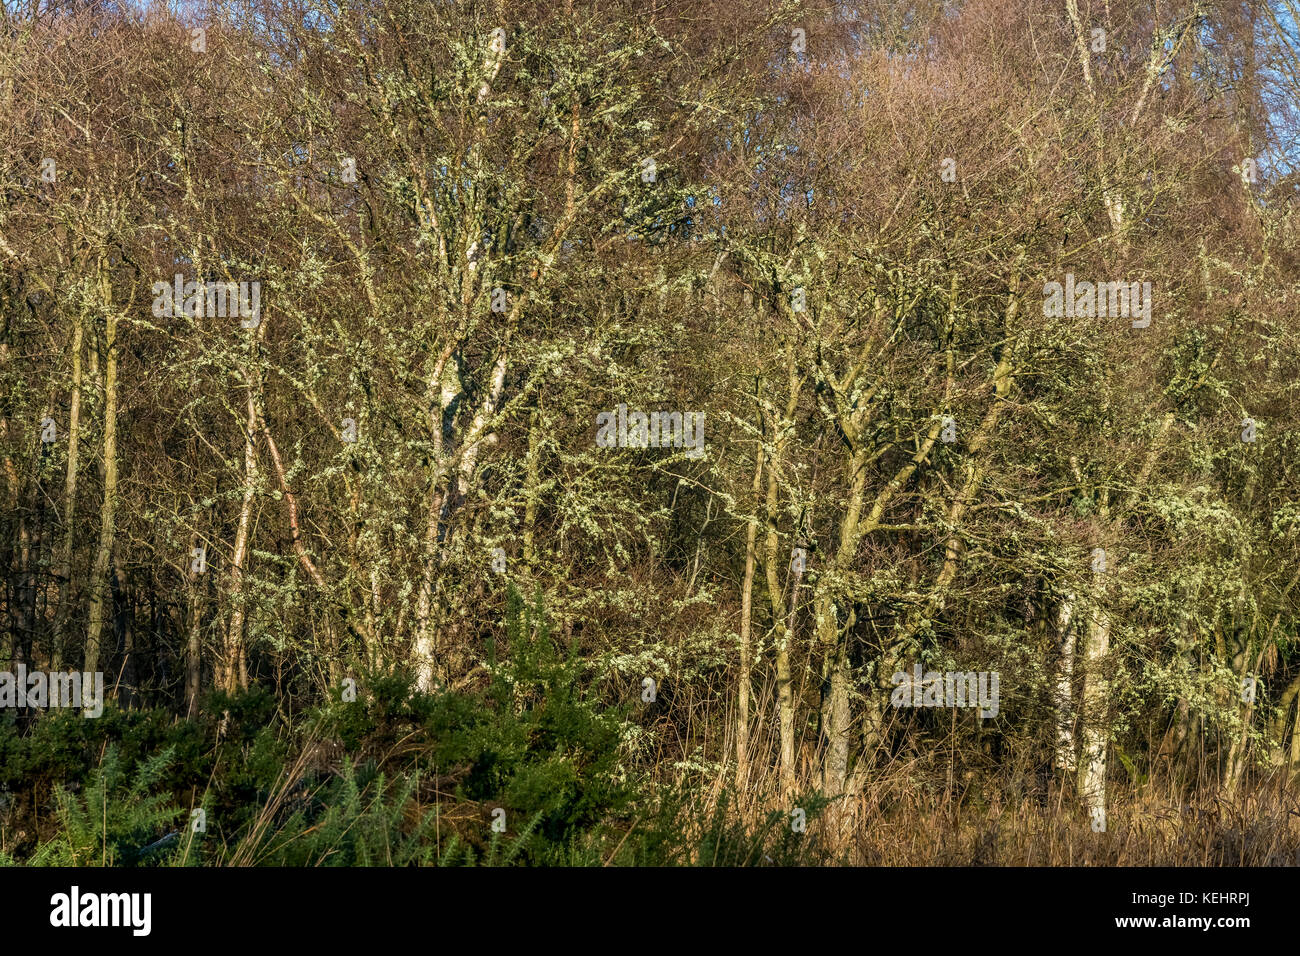 Trees with a lot of reindeer lichen on the branches. Stock Photo